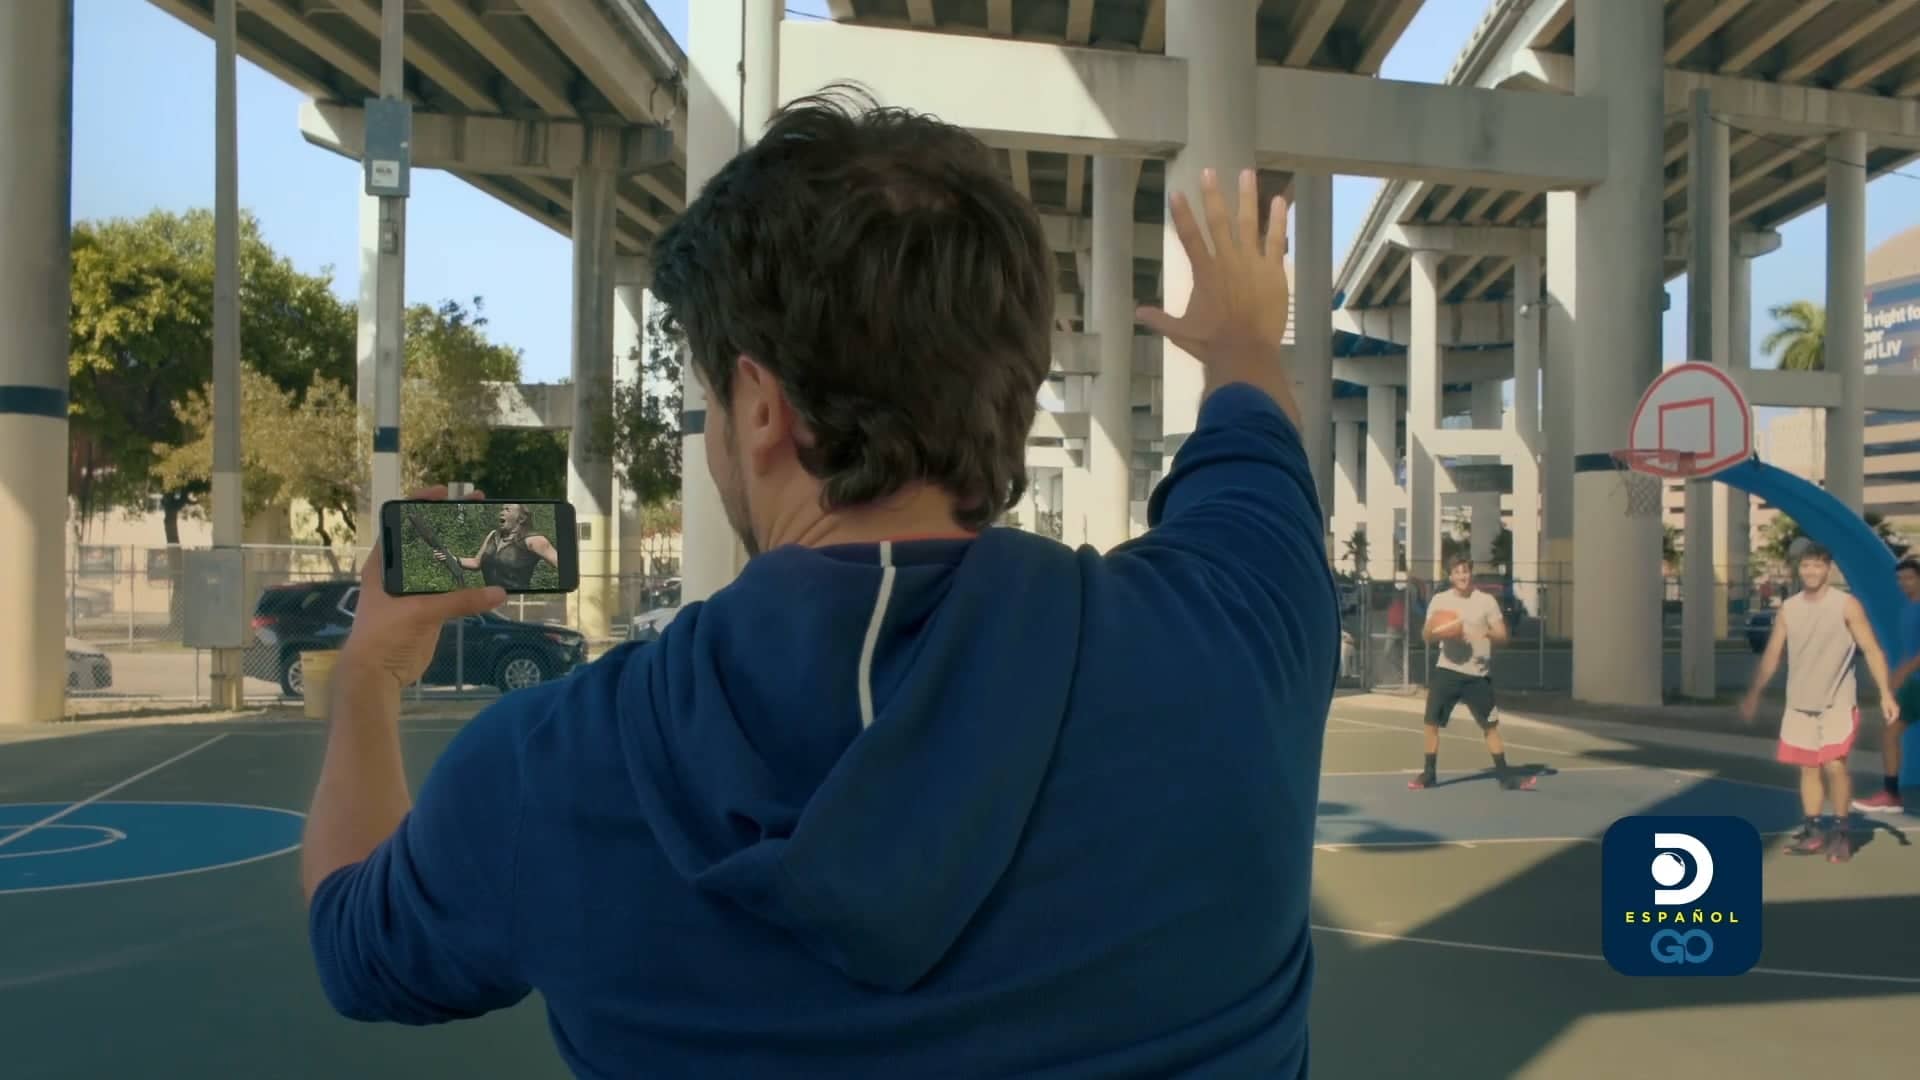 Main character of Discovery GO spot using the app while he is playing basketball